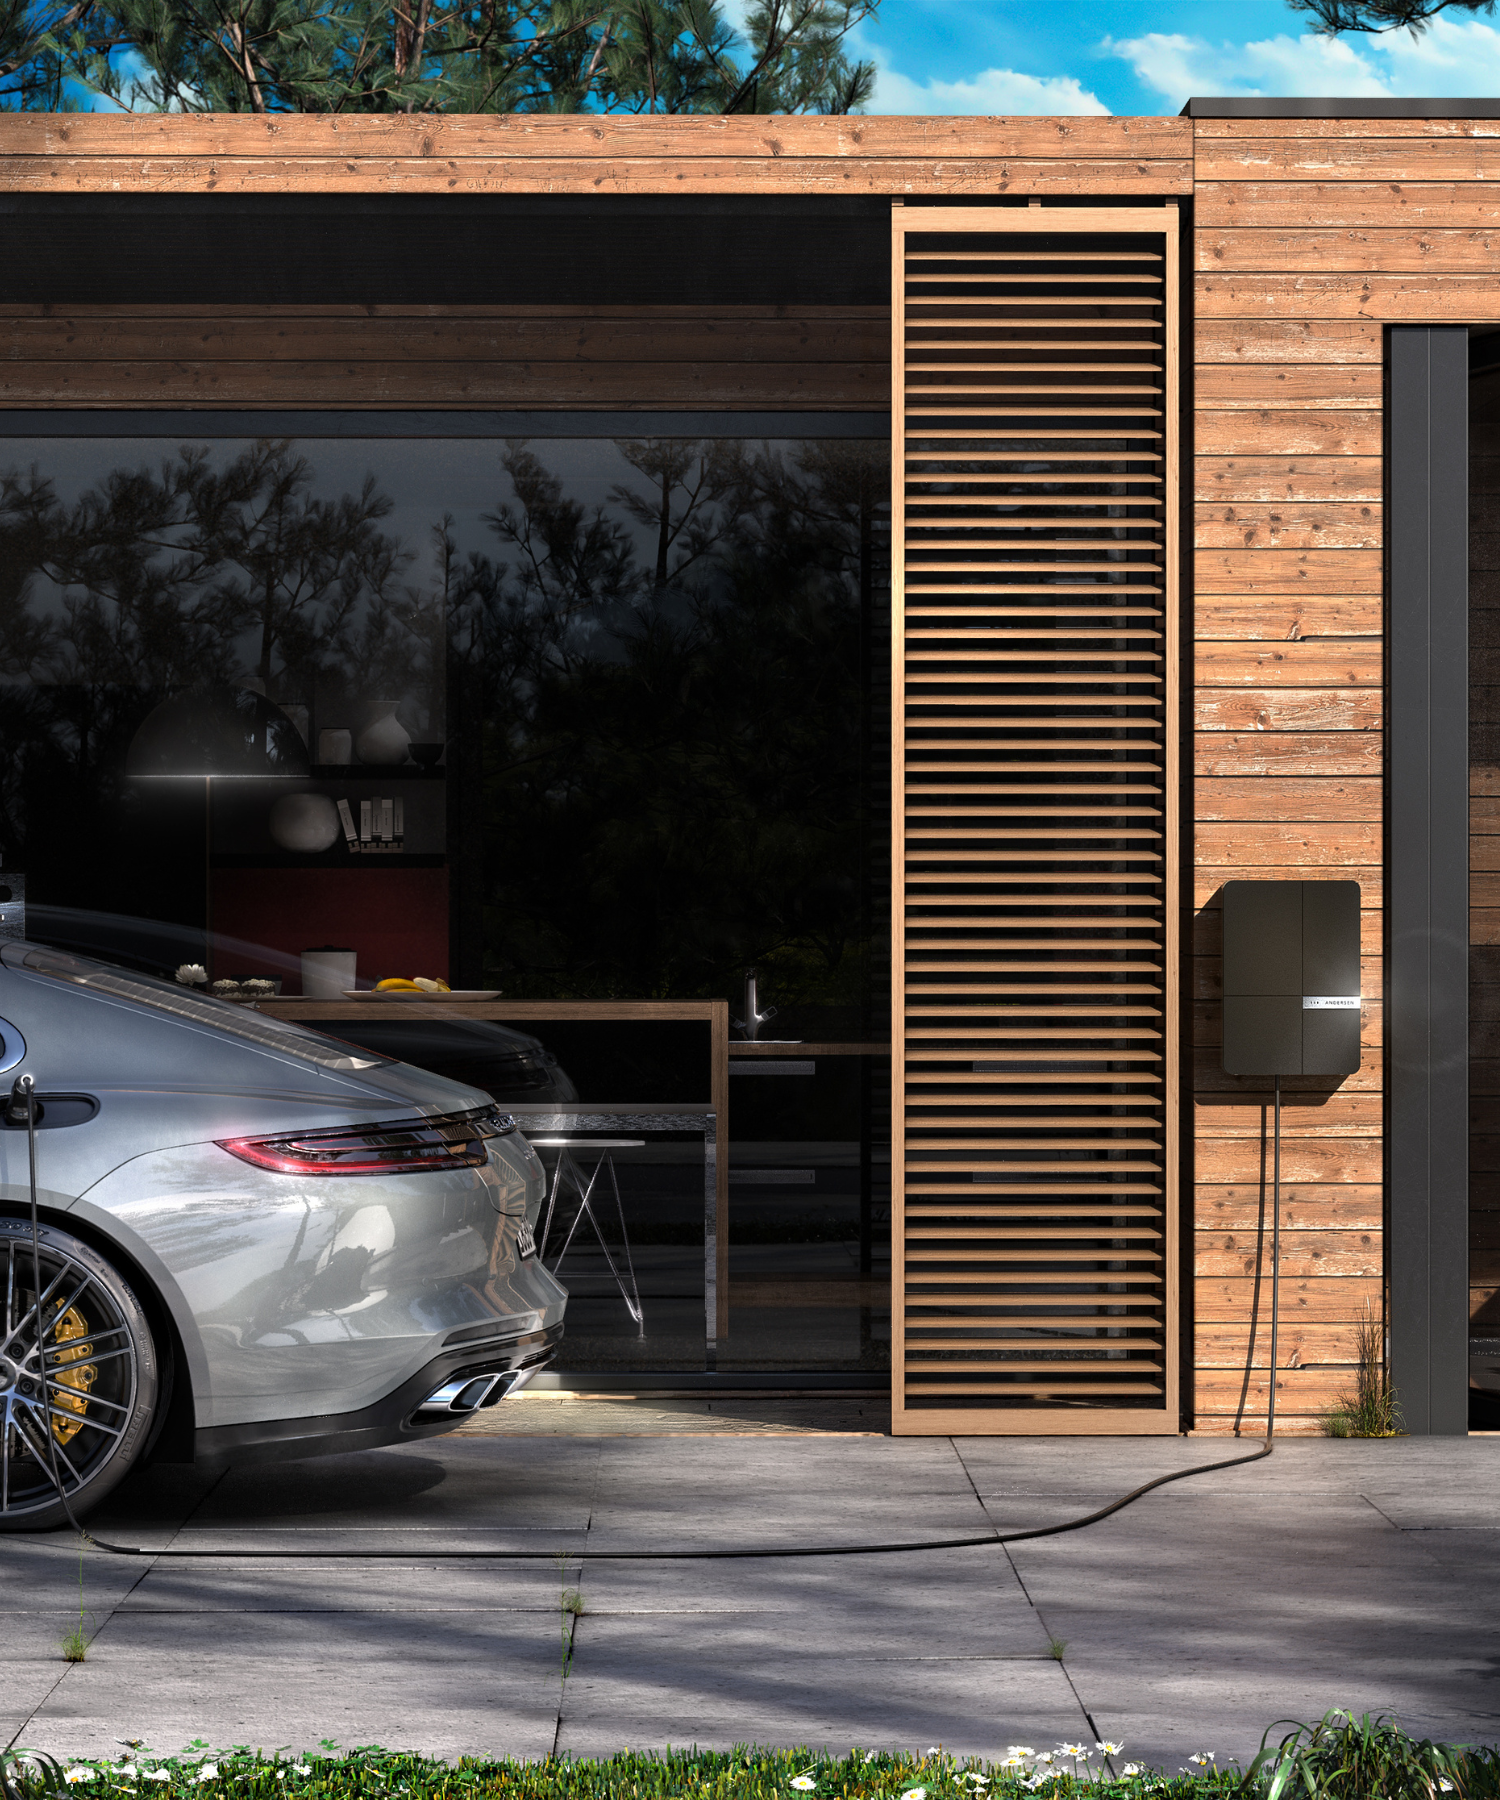 Electric Vehicle Charger for Porsche Owners